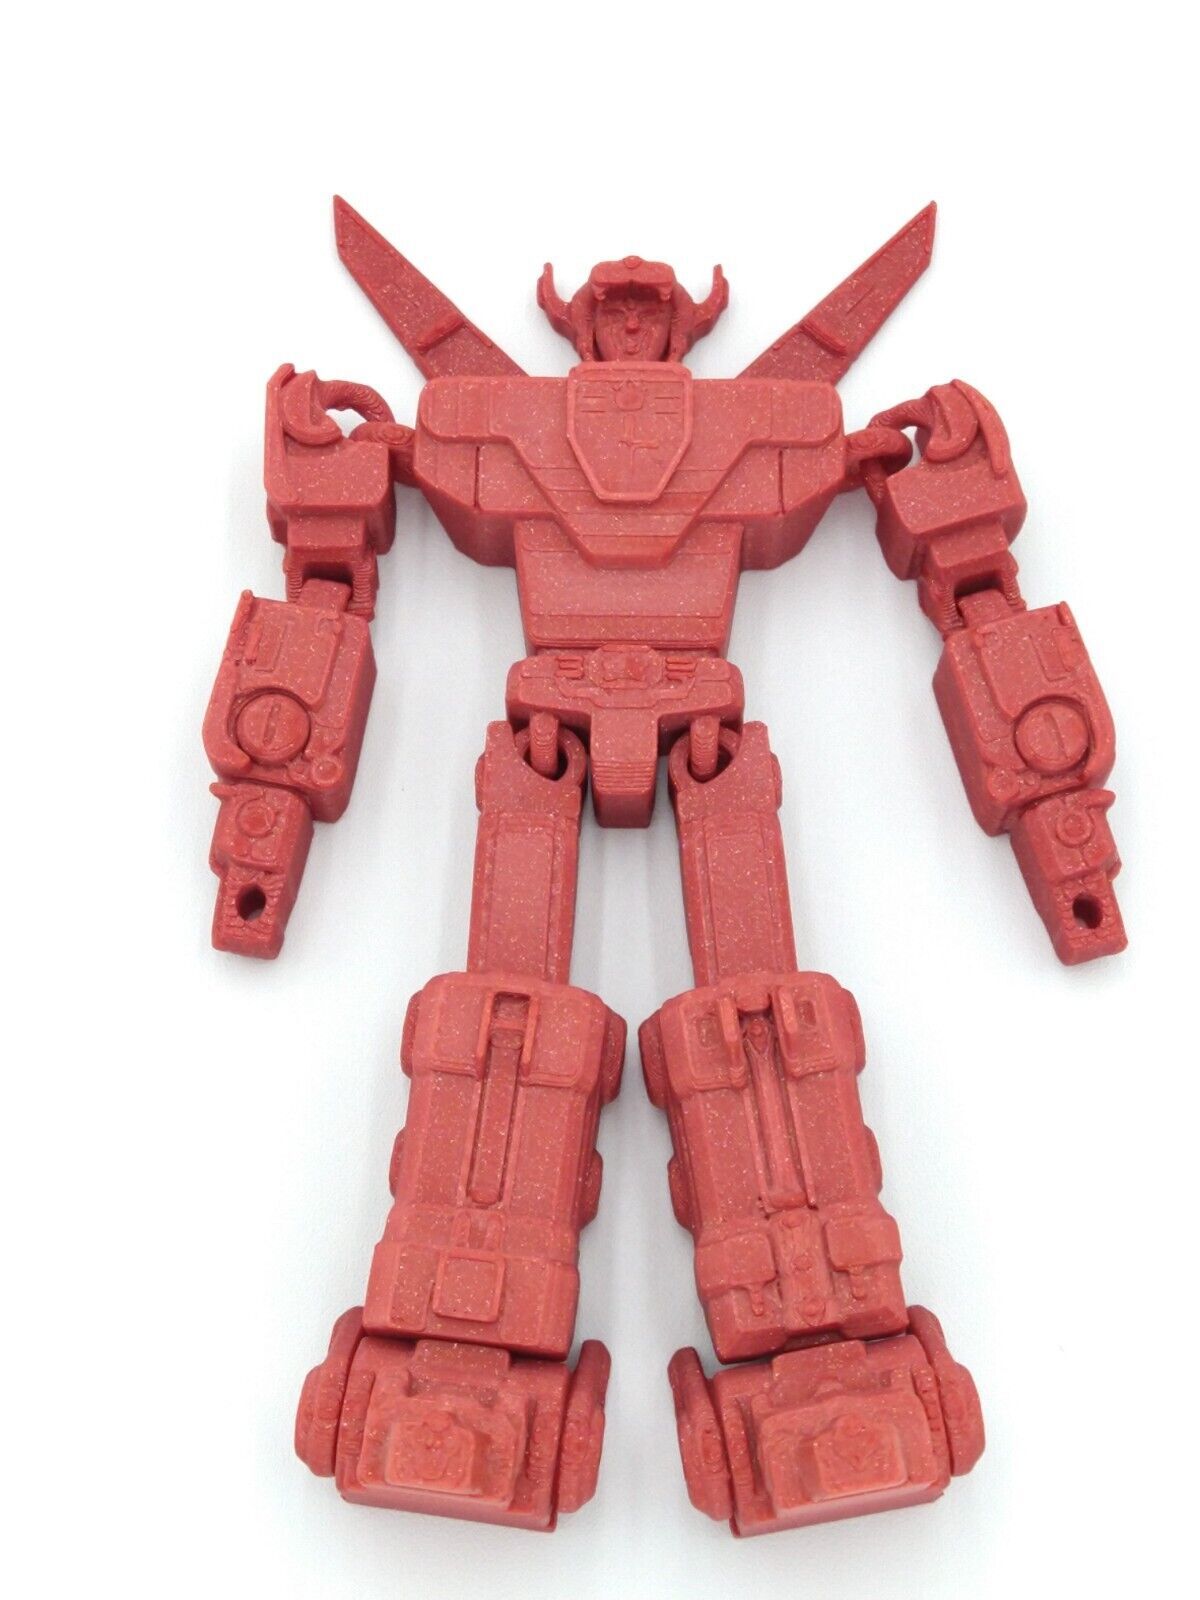 Voltron Figure Articulated Flexi Shiny Red 5" 3D Printed Figure - $29.02